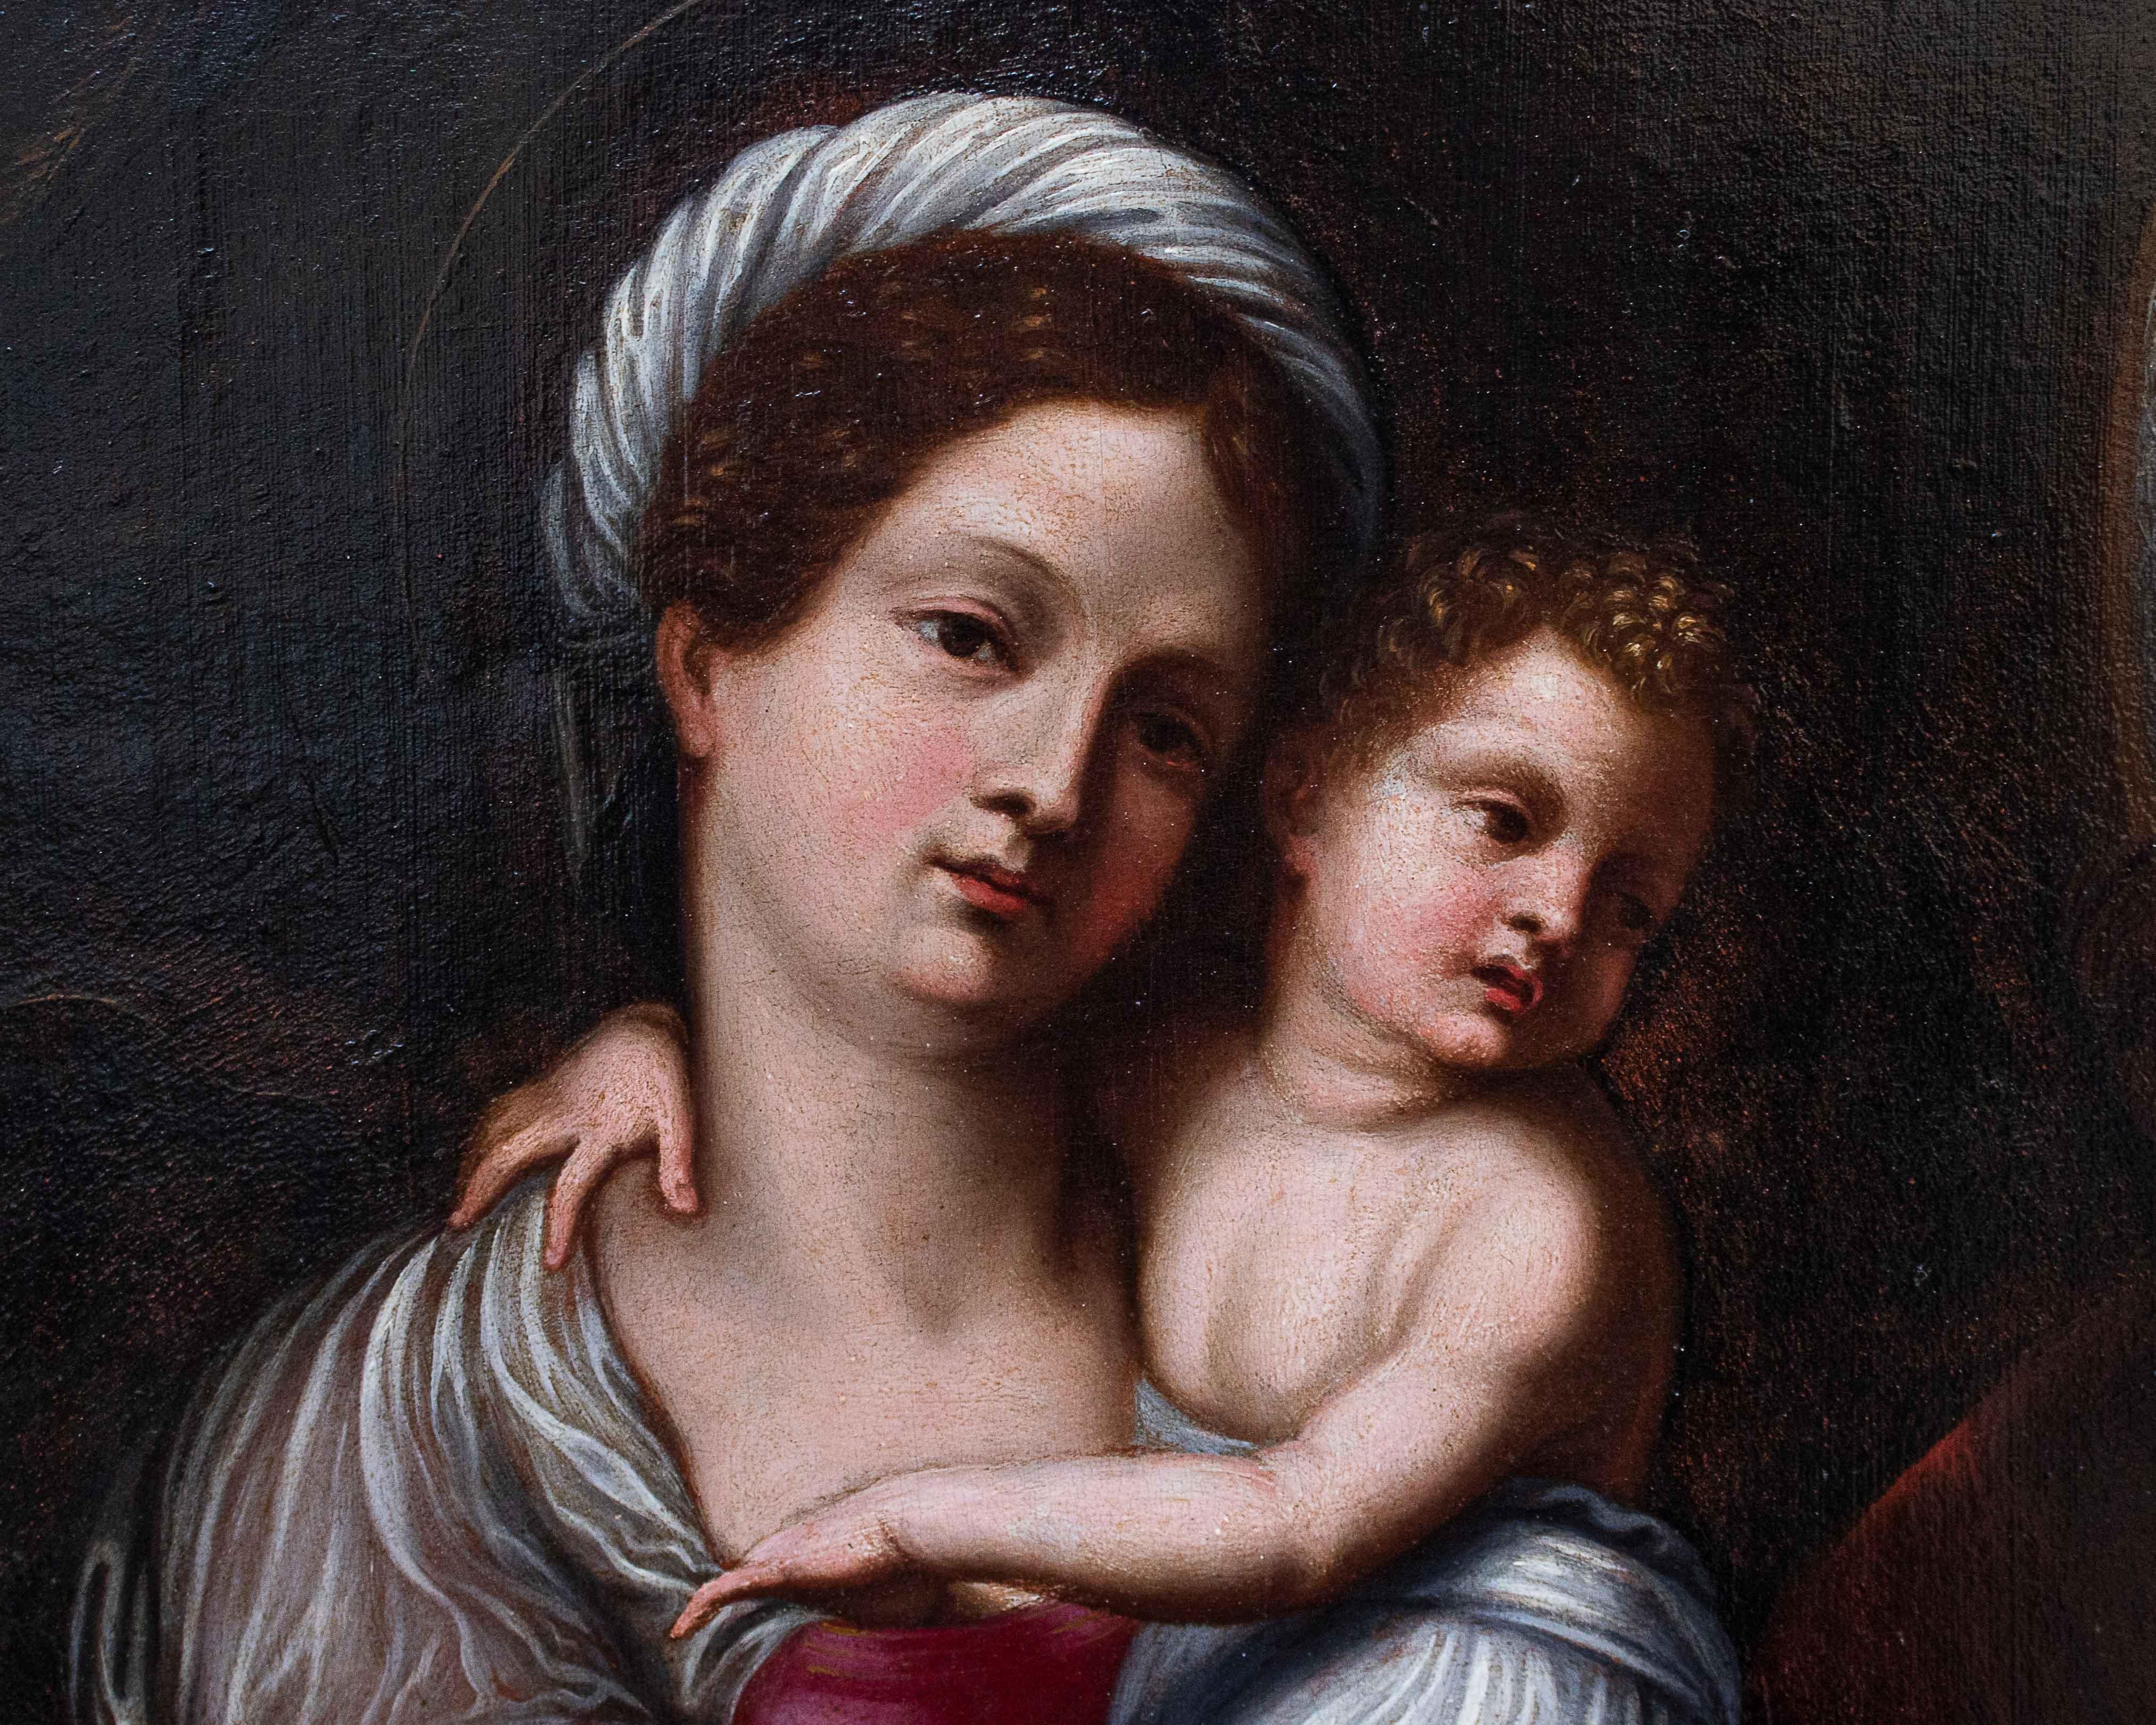 Italian 16th Century Madonna with Child and Holy Bishop Painting Oil on Panel